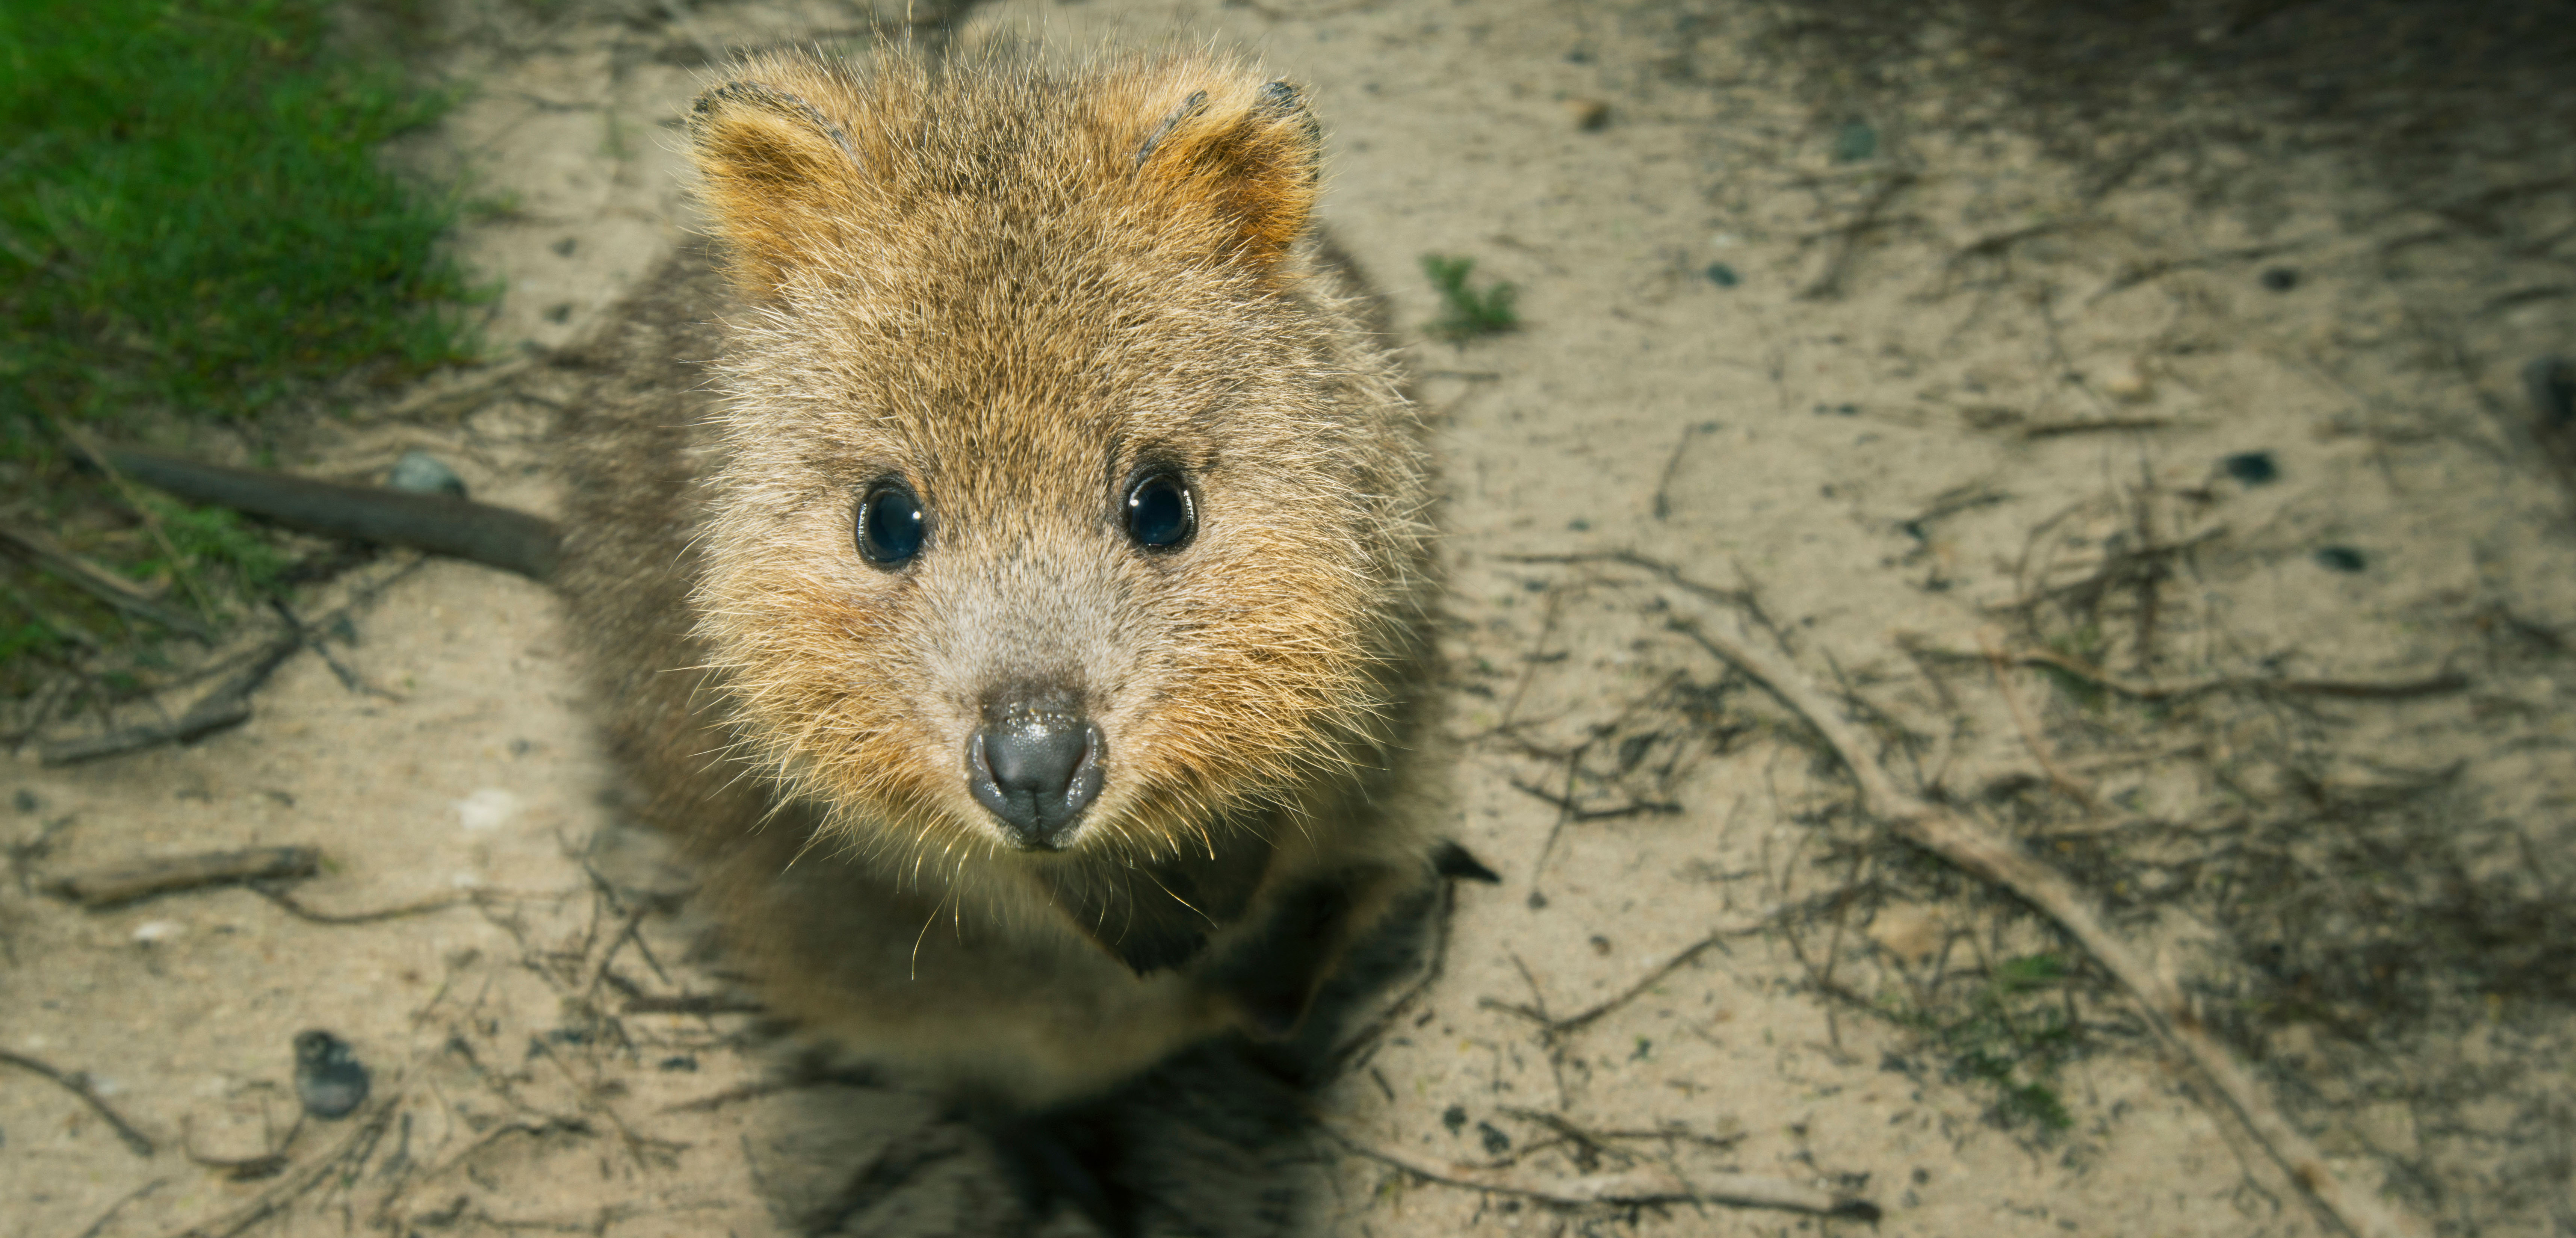 Rottnest Island’s cute and cuddly quokkas are not accustomed to dealing with humans—and they don’t fare well when they do. Photo by Kevin Schafer/Alamy Stock Photo